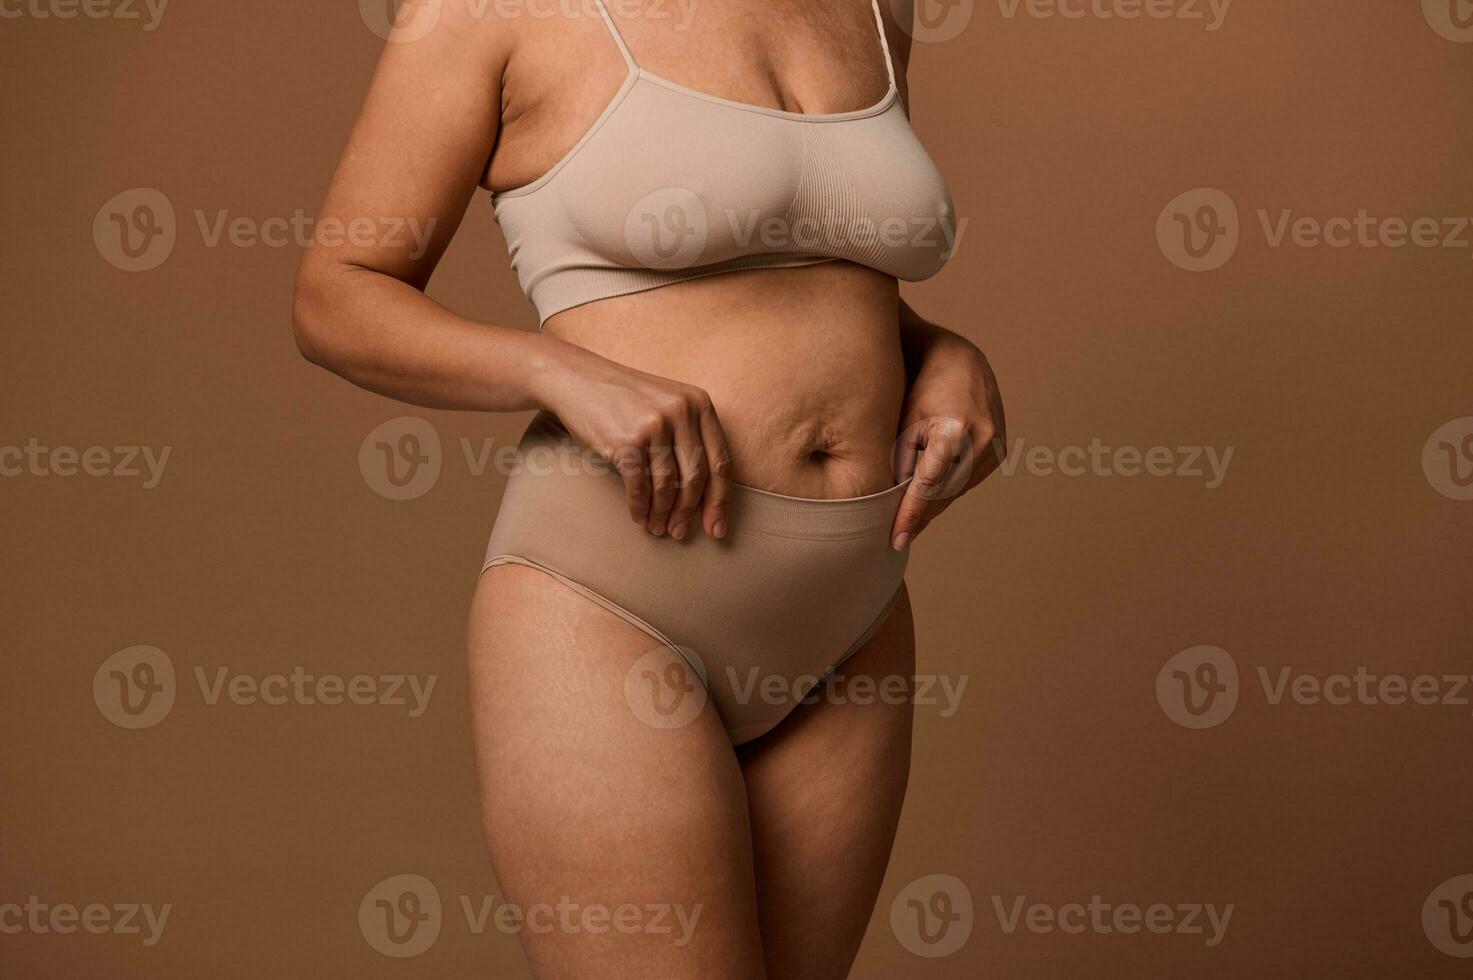 Close-up body of overweight woman with stretch marks and saggy belly after pregnancy, isolated on beige background with copy space for ads. Concept of love and acceptance, body positive. photo